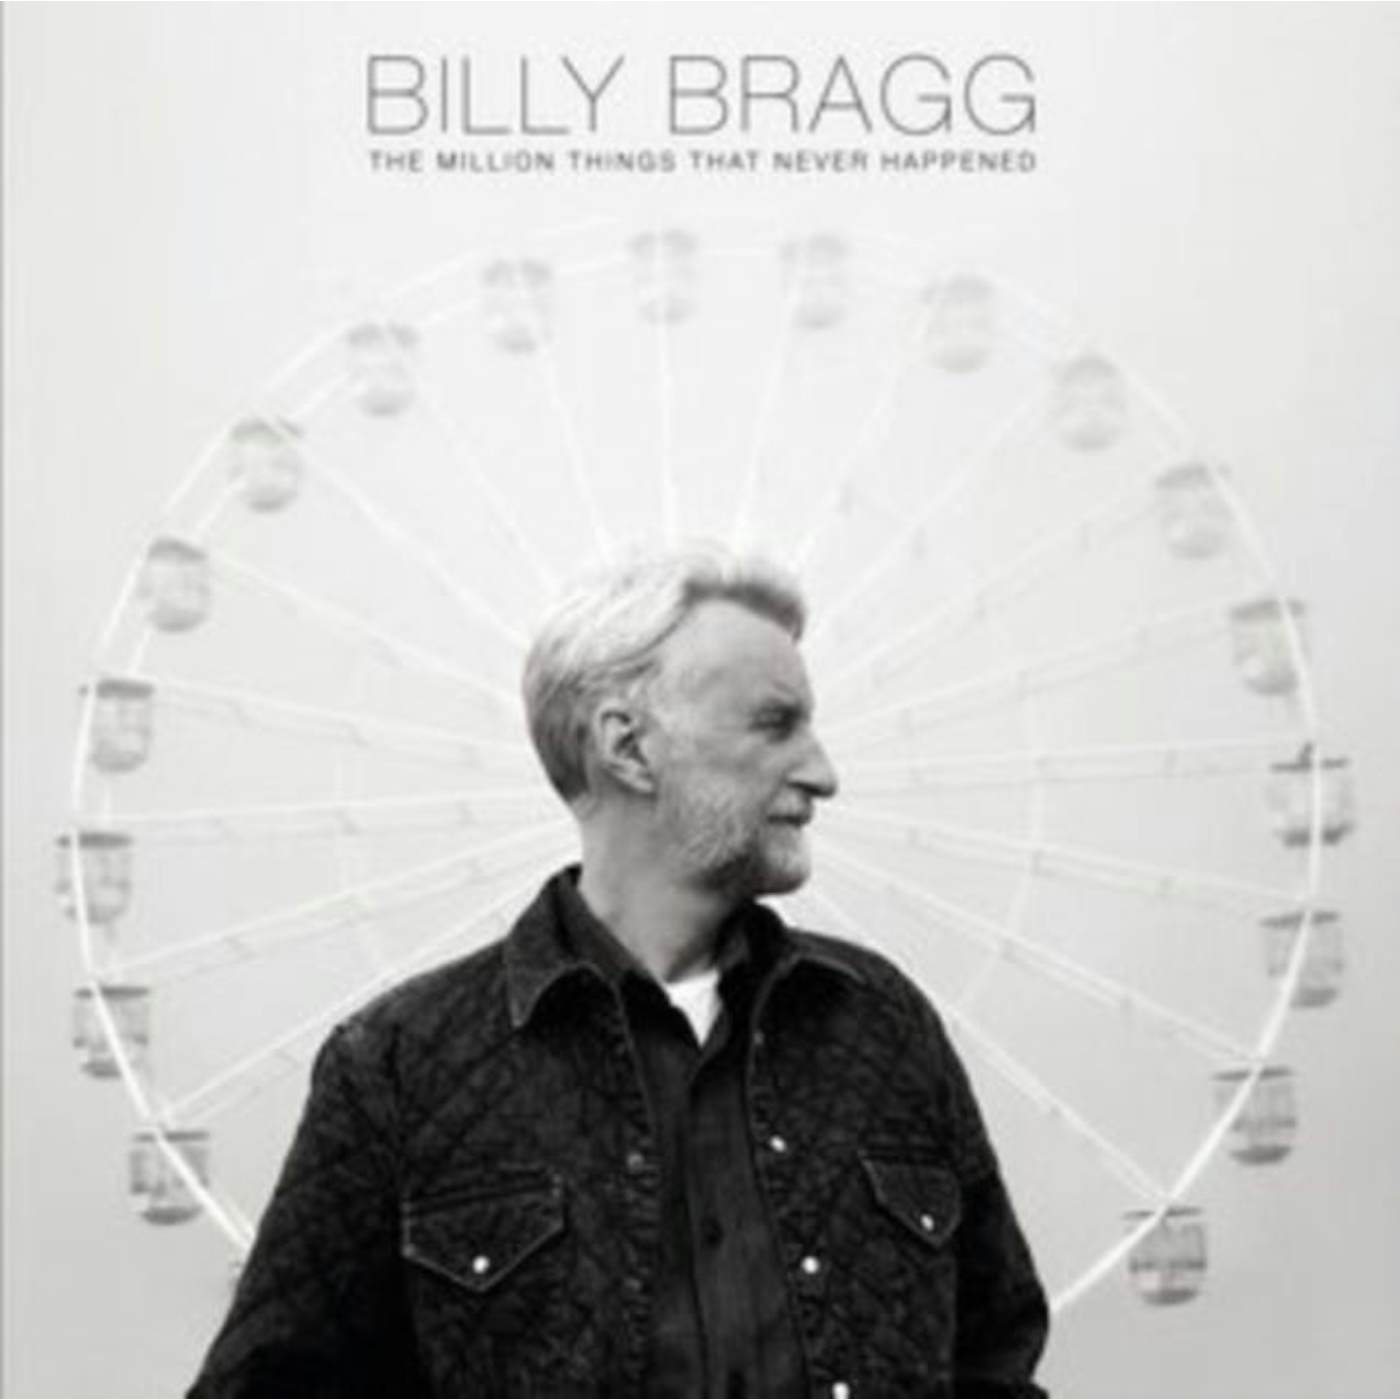 Billy Bragg LP Vinyl Record - The Million Things That Never Happened